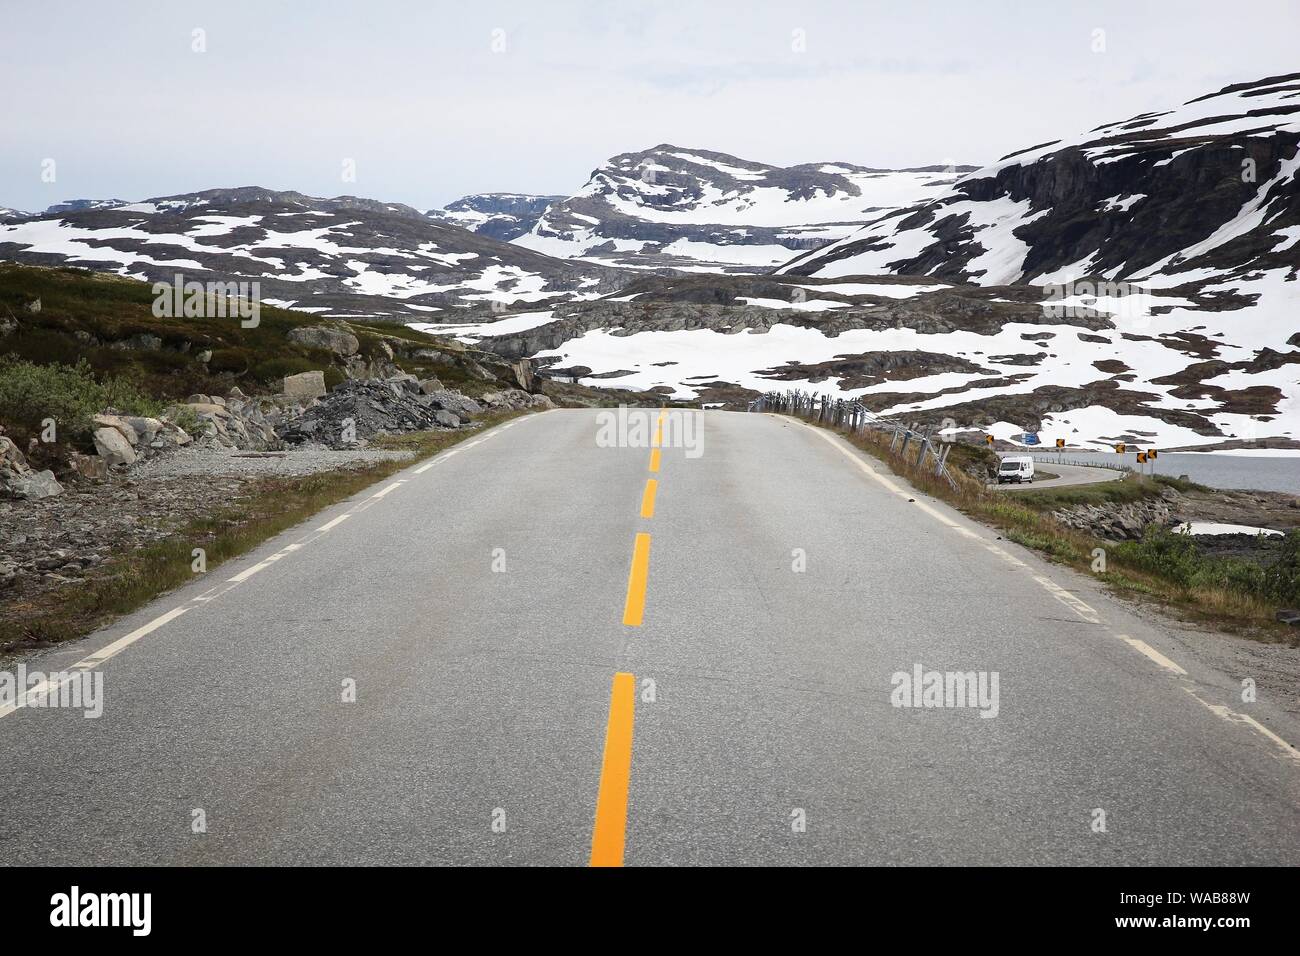 Norway landscape - Hallingskarvet mountain road with snow in summer. July view. Stock Photo